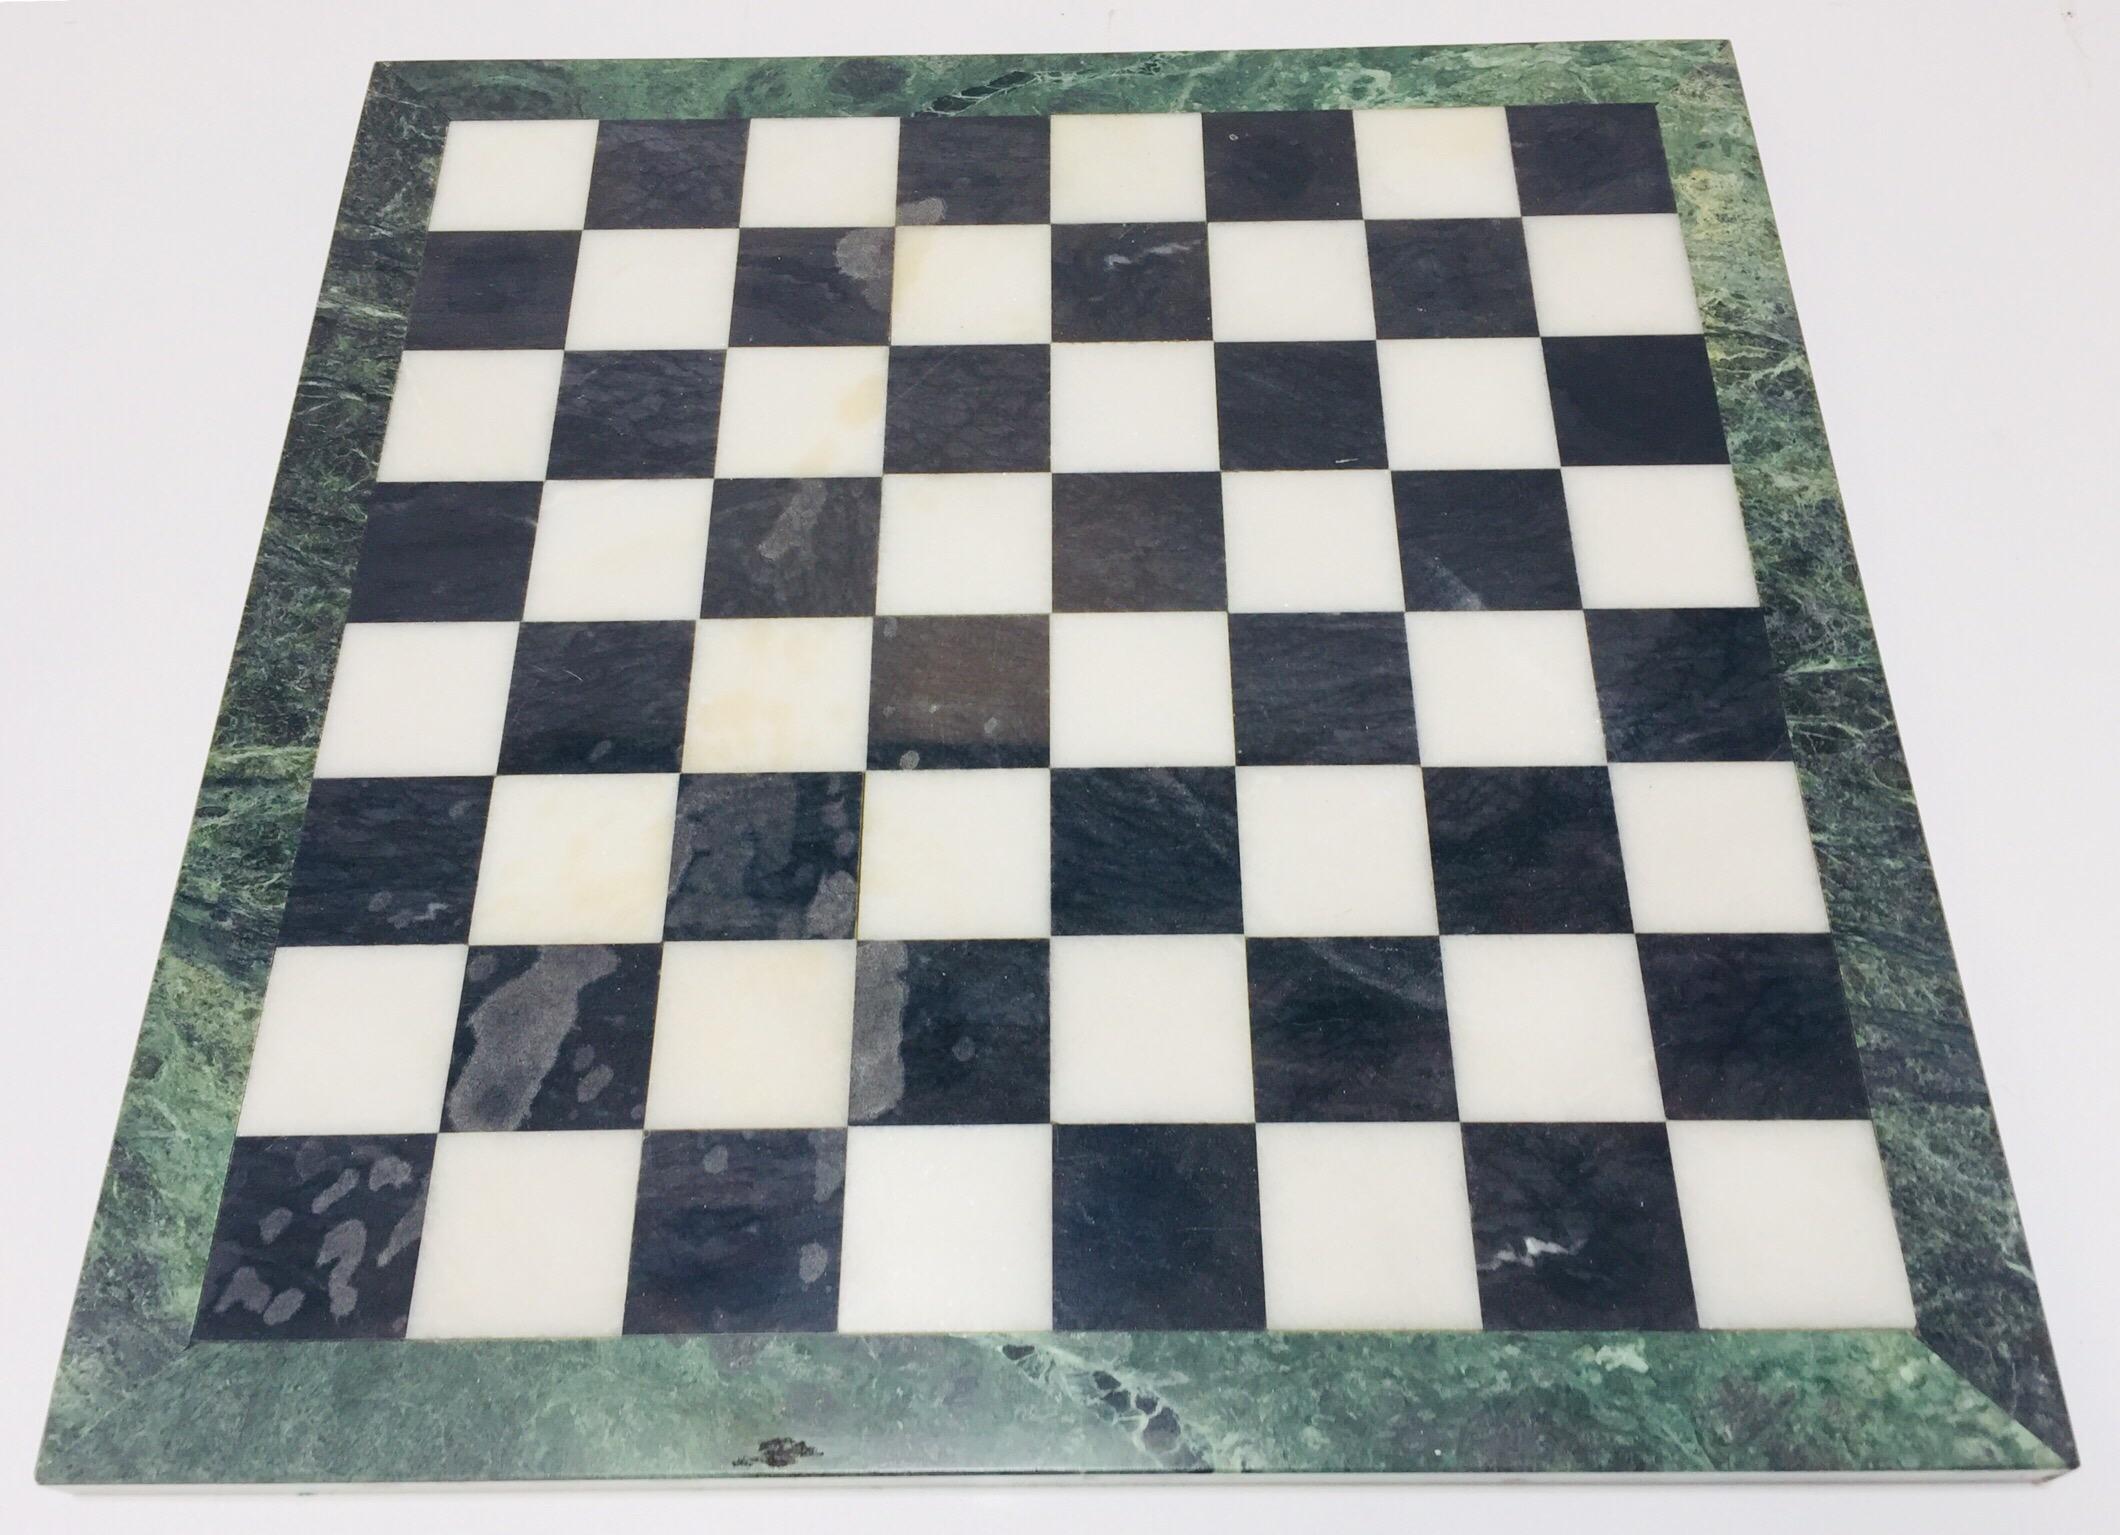 Marble Chess Board with Hand-Carved Black and White Onyx Chess Pieces 1